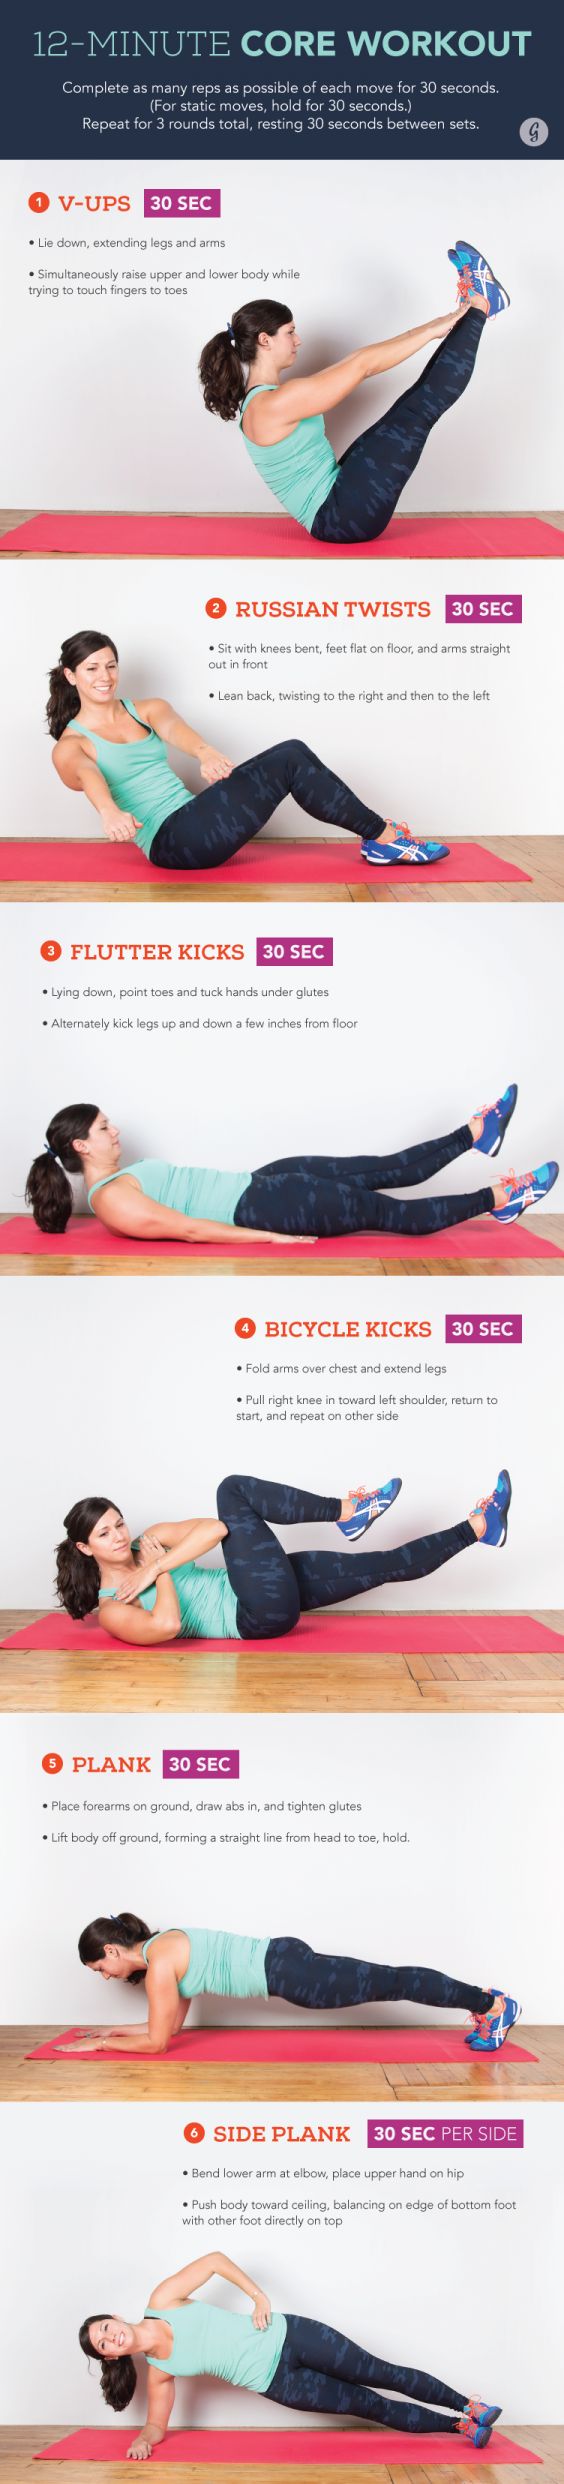 Bodyweight Core Workout: Upper Abs, Lower Abs, Obliques, and More